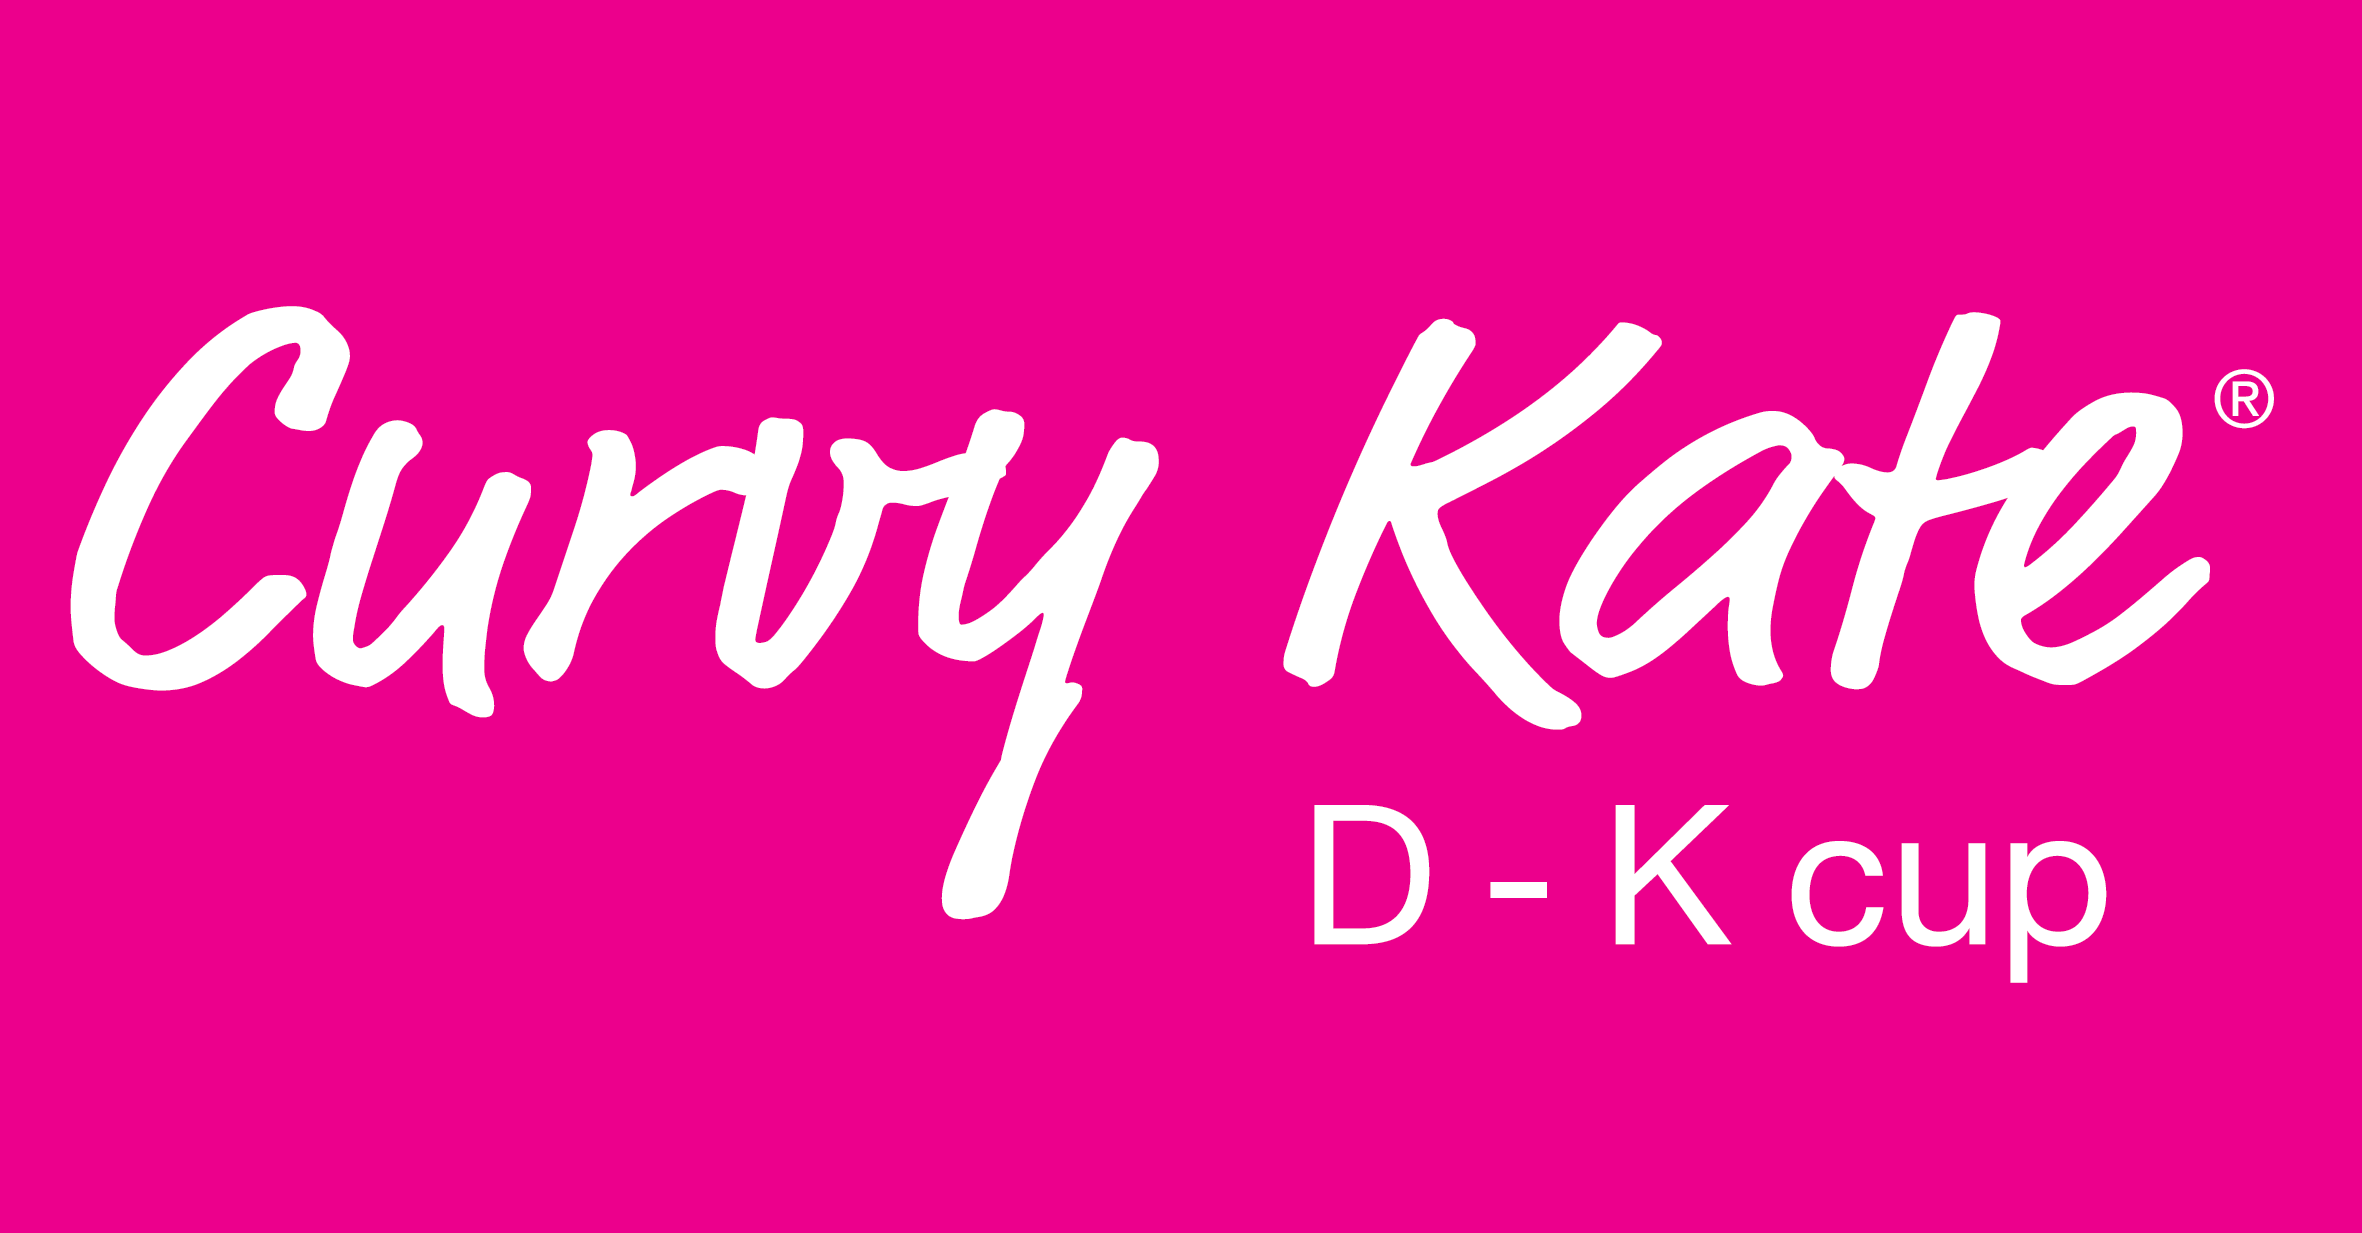 Curvy Kate Logo in white text on pink background